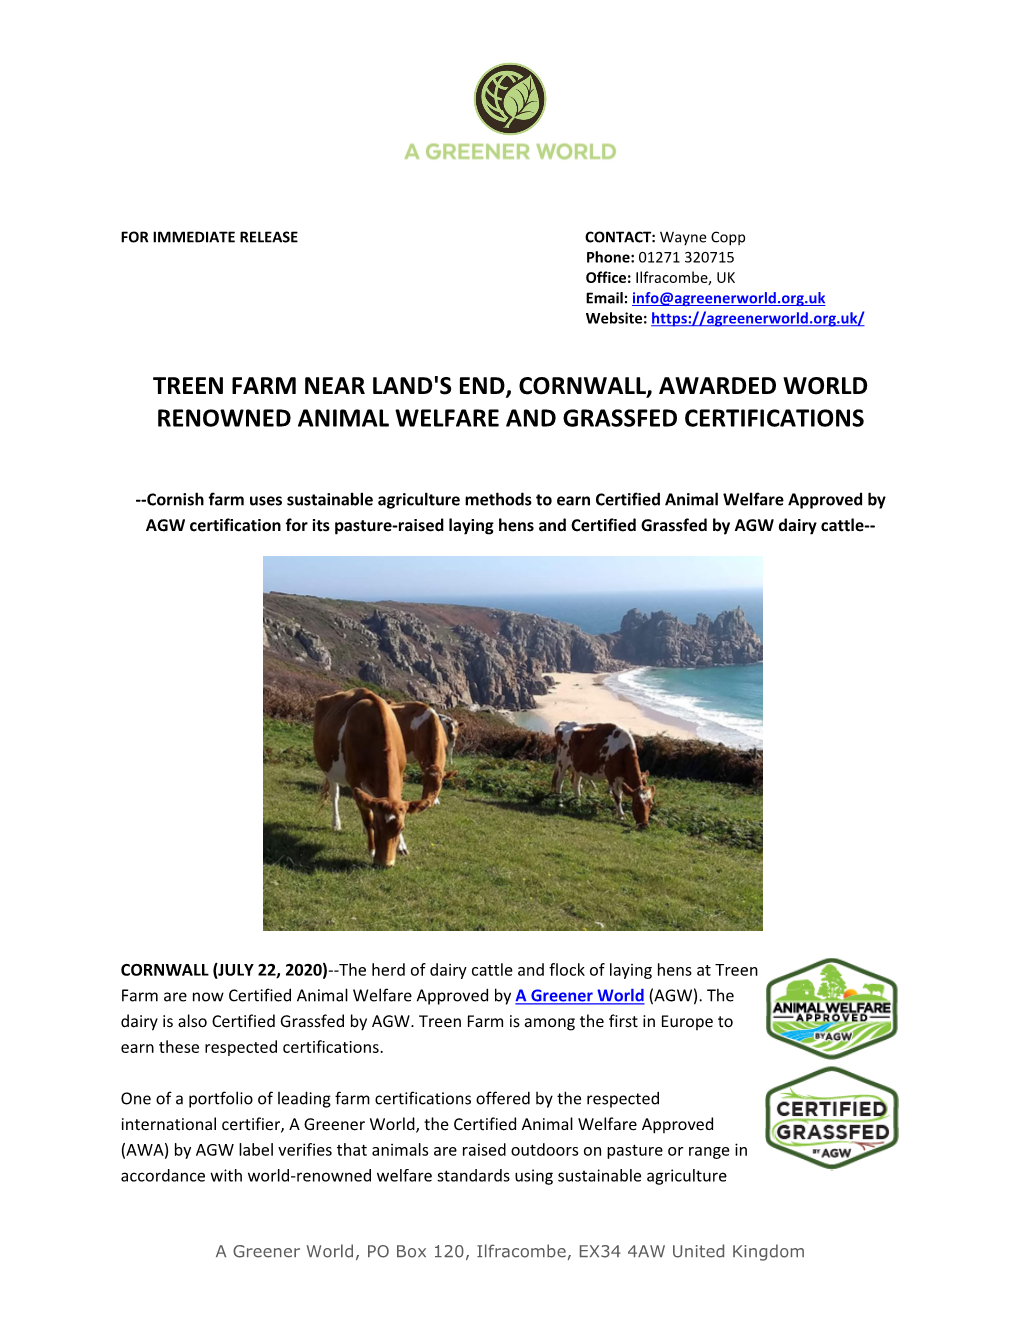 Treen Farm Near Land's End, Cornwall, Awarded World Renowned Animal Welfare and Grassfed Certifications